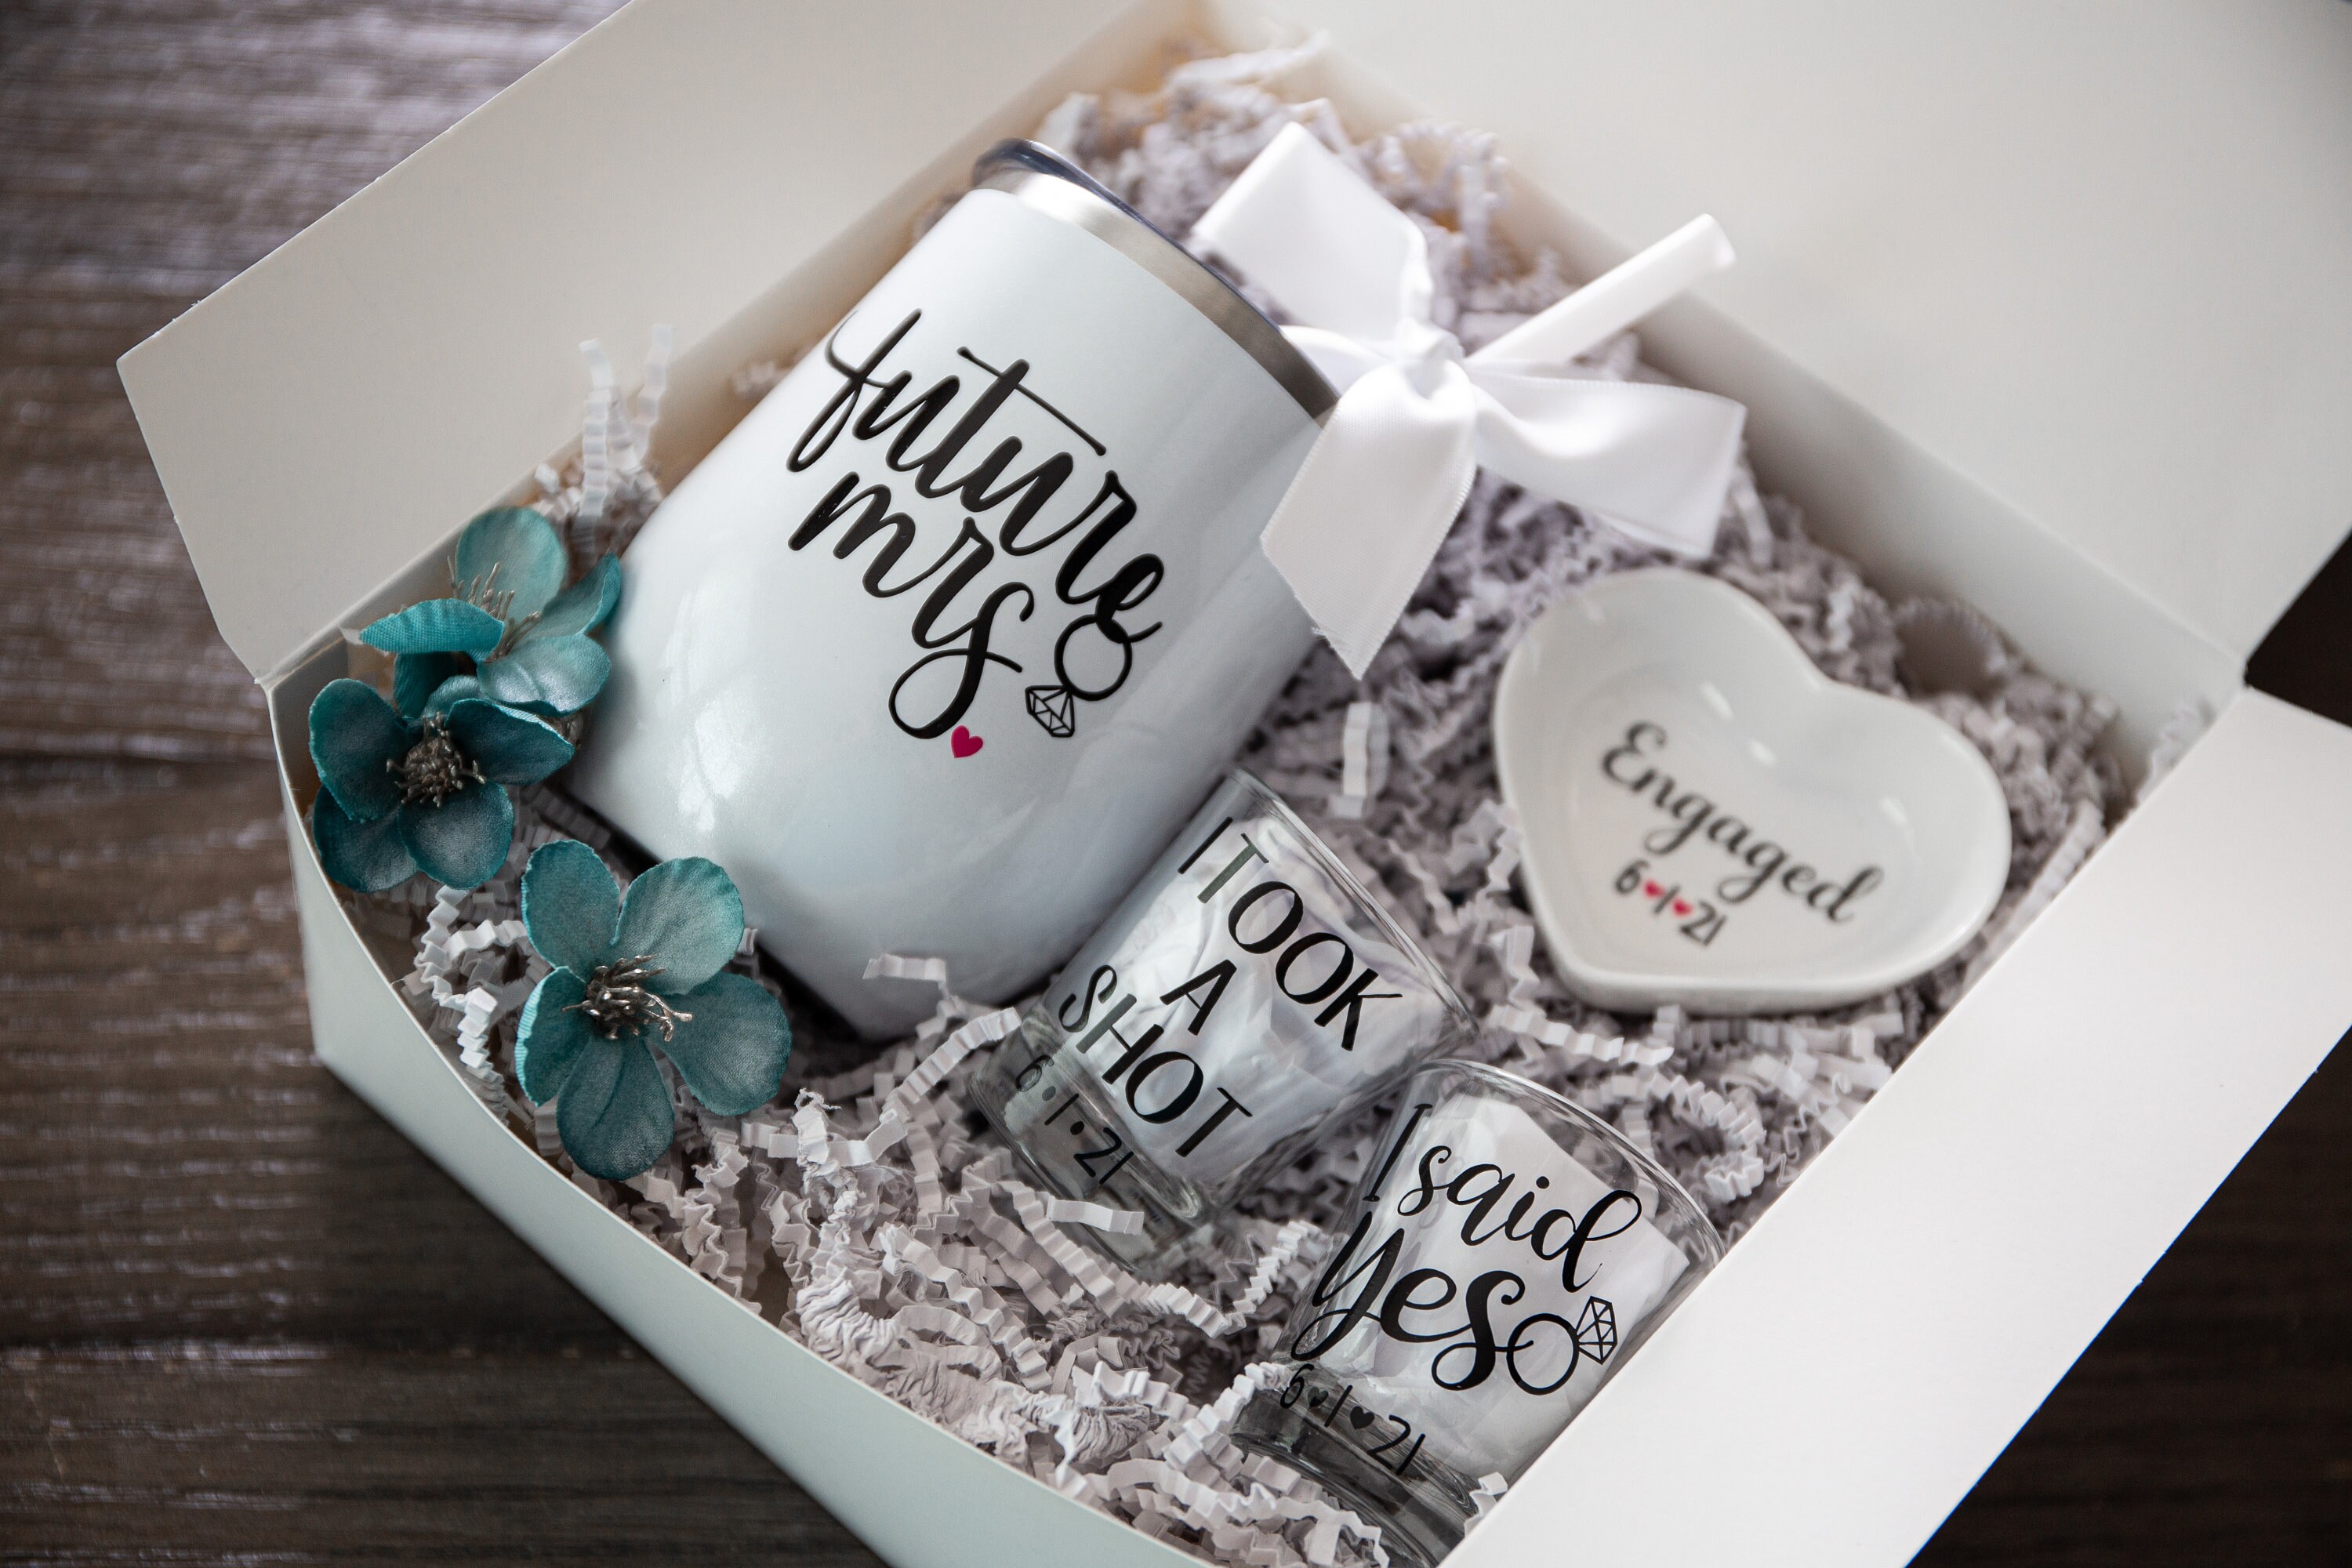  lpmisake Wedding Gifts Engagement Gifts for Couples